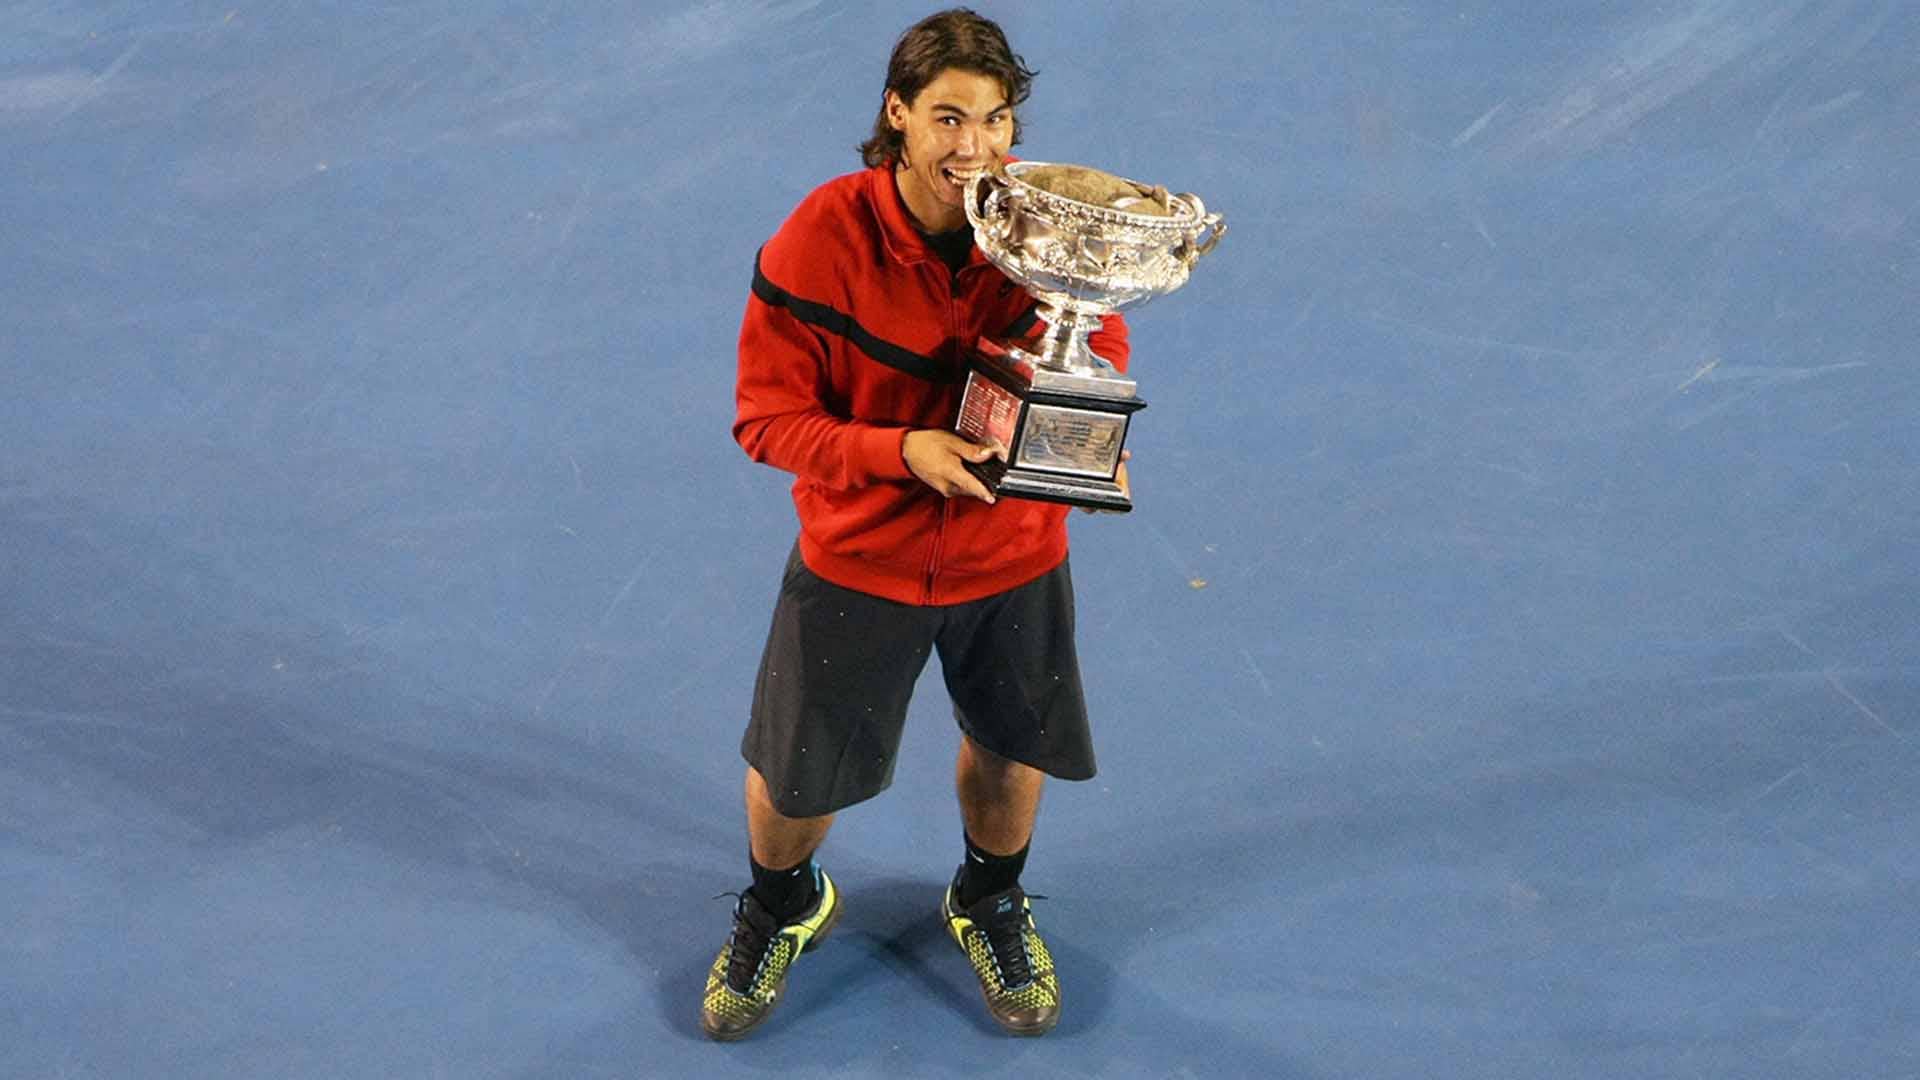 Rafael Nadal overcomes Roger Federer 7-5, 3-6, 7-6(3), 3-6, 6-2 to win his first Australian Open title.